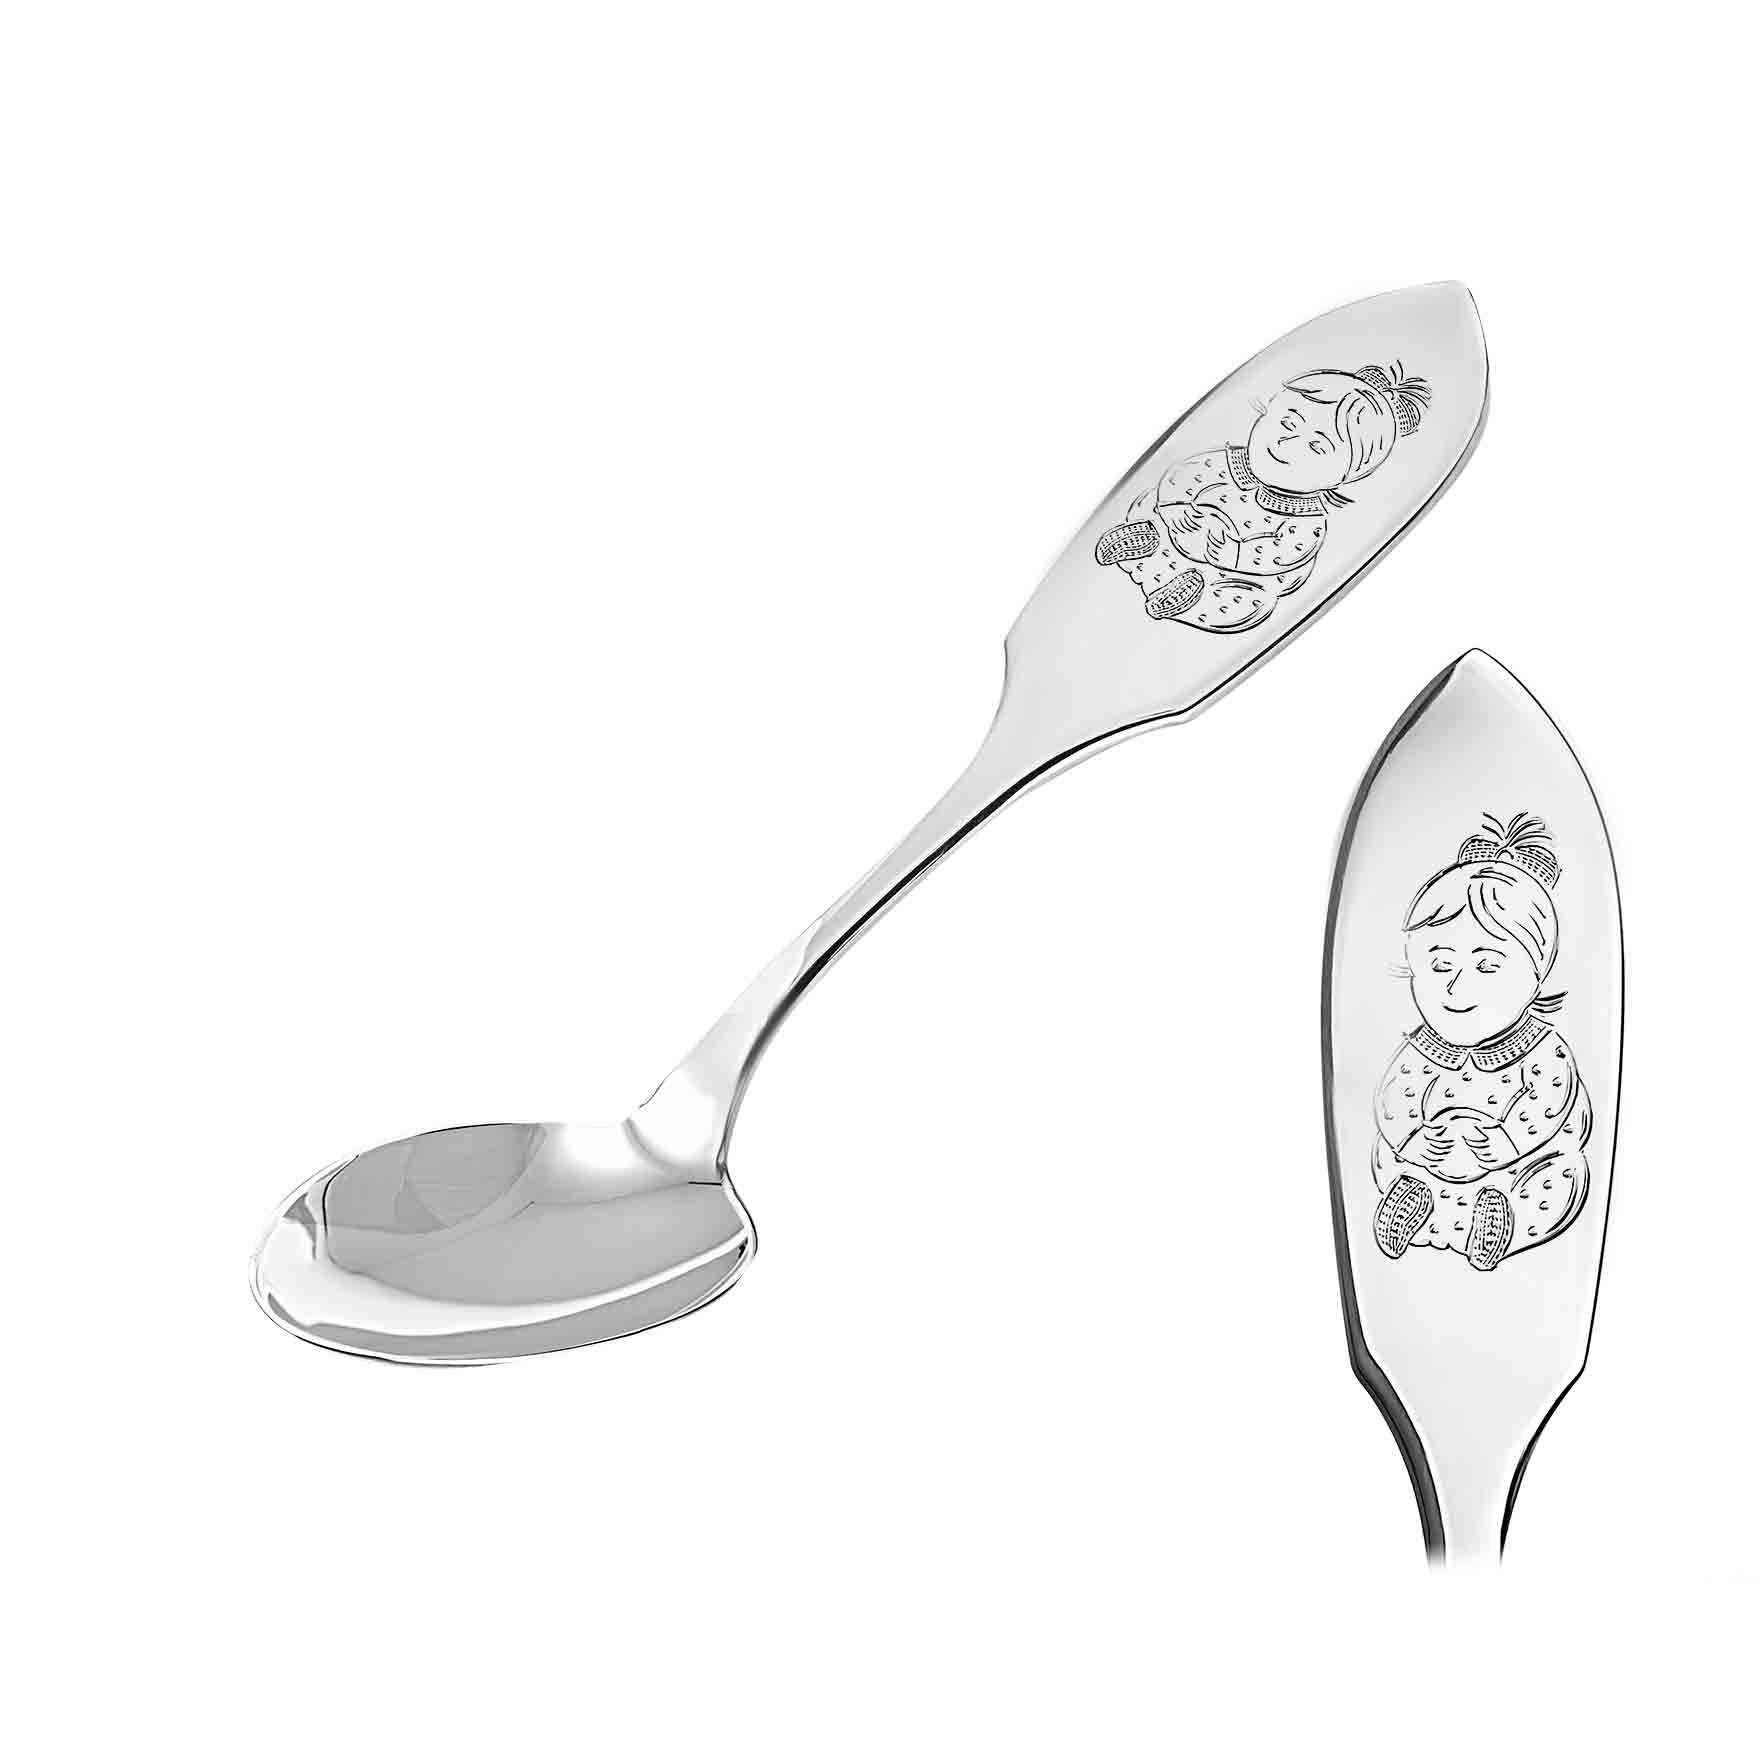 925 silver baby girl spoon - baby shower gift